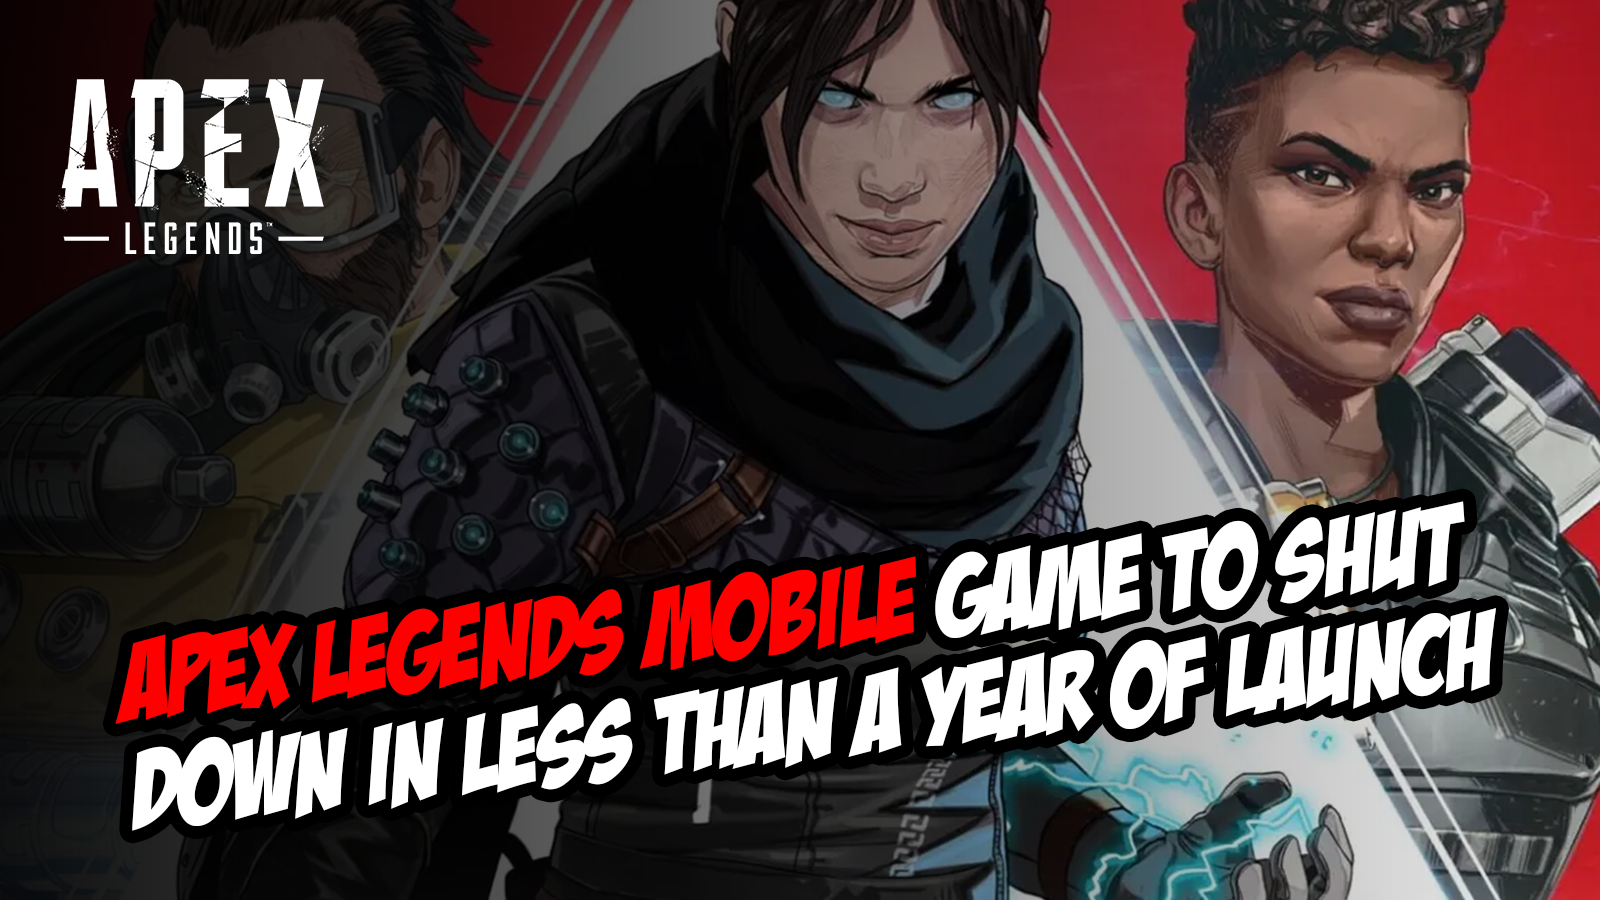 Apex Legends Mobile Game to Shut Down in Less Than a Year of Launch: Know What Happened